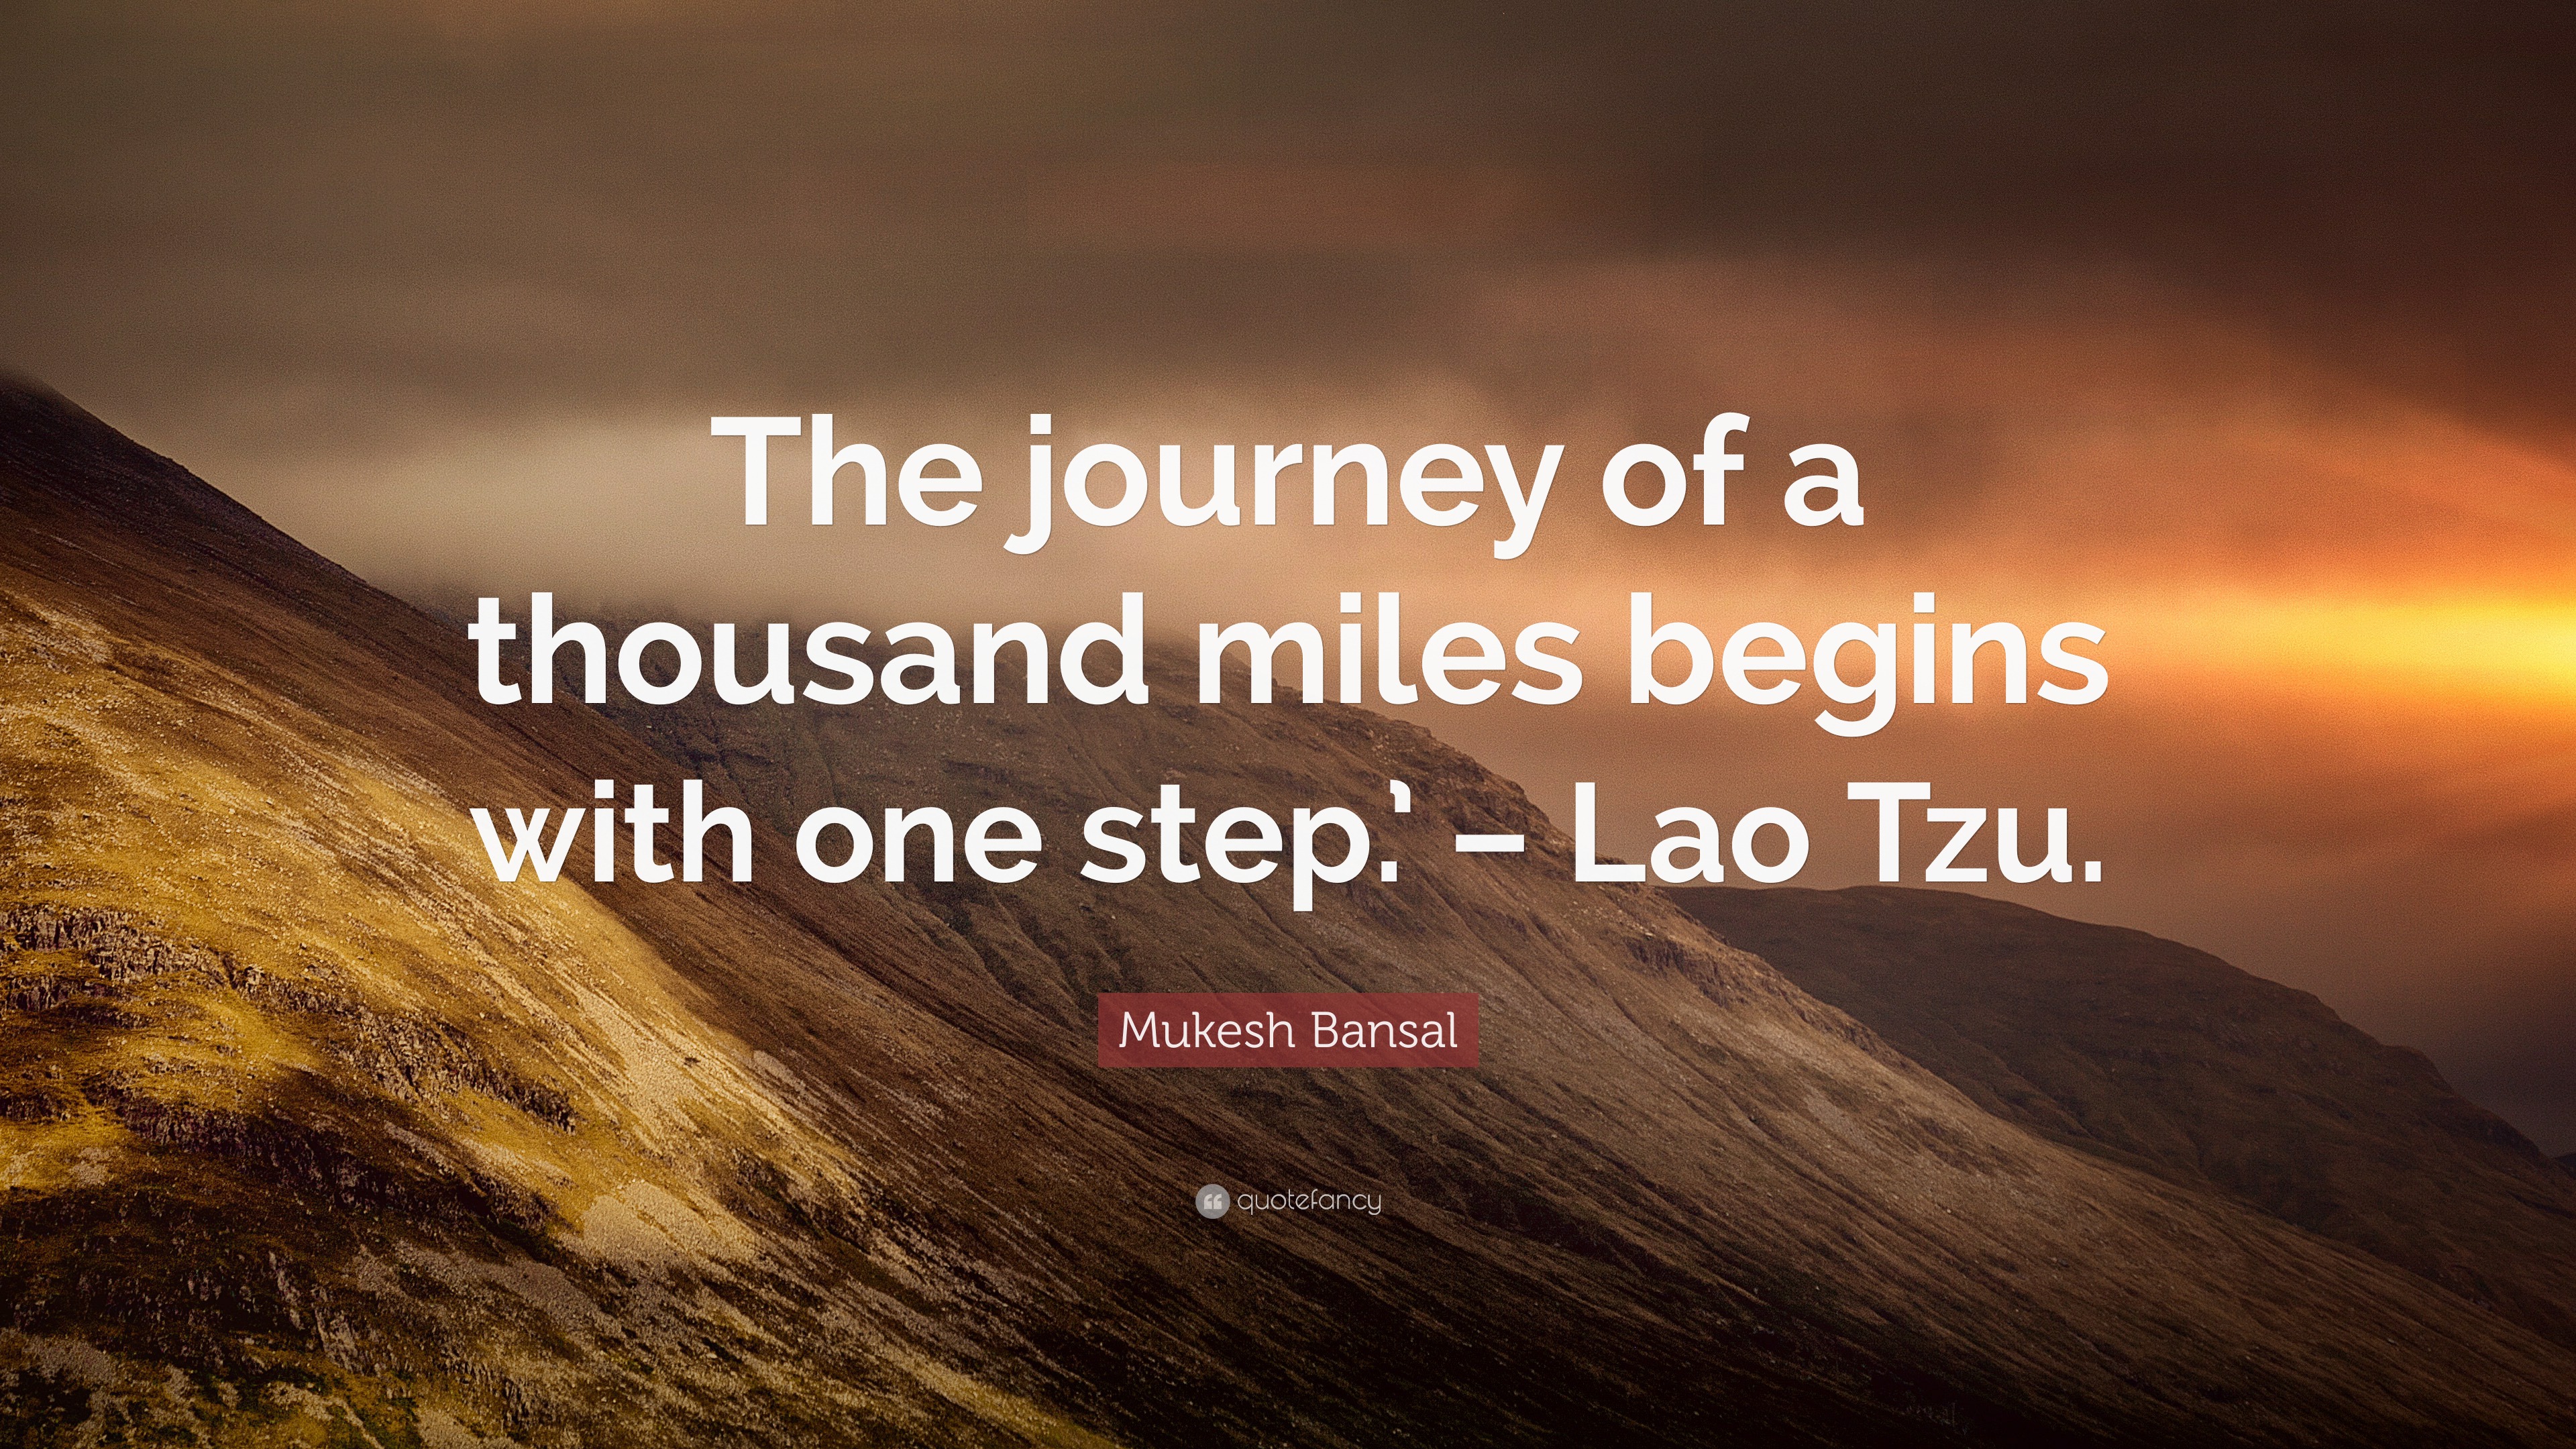 Mukesh Bansal Quote: “The journey of a thousand miles begins with one ...